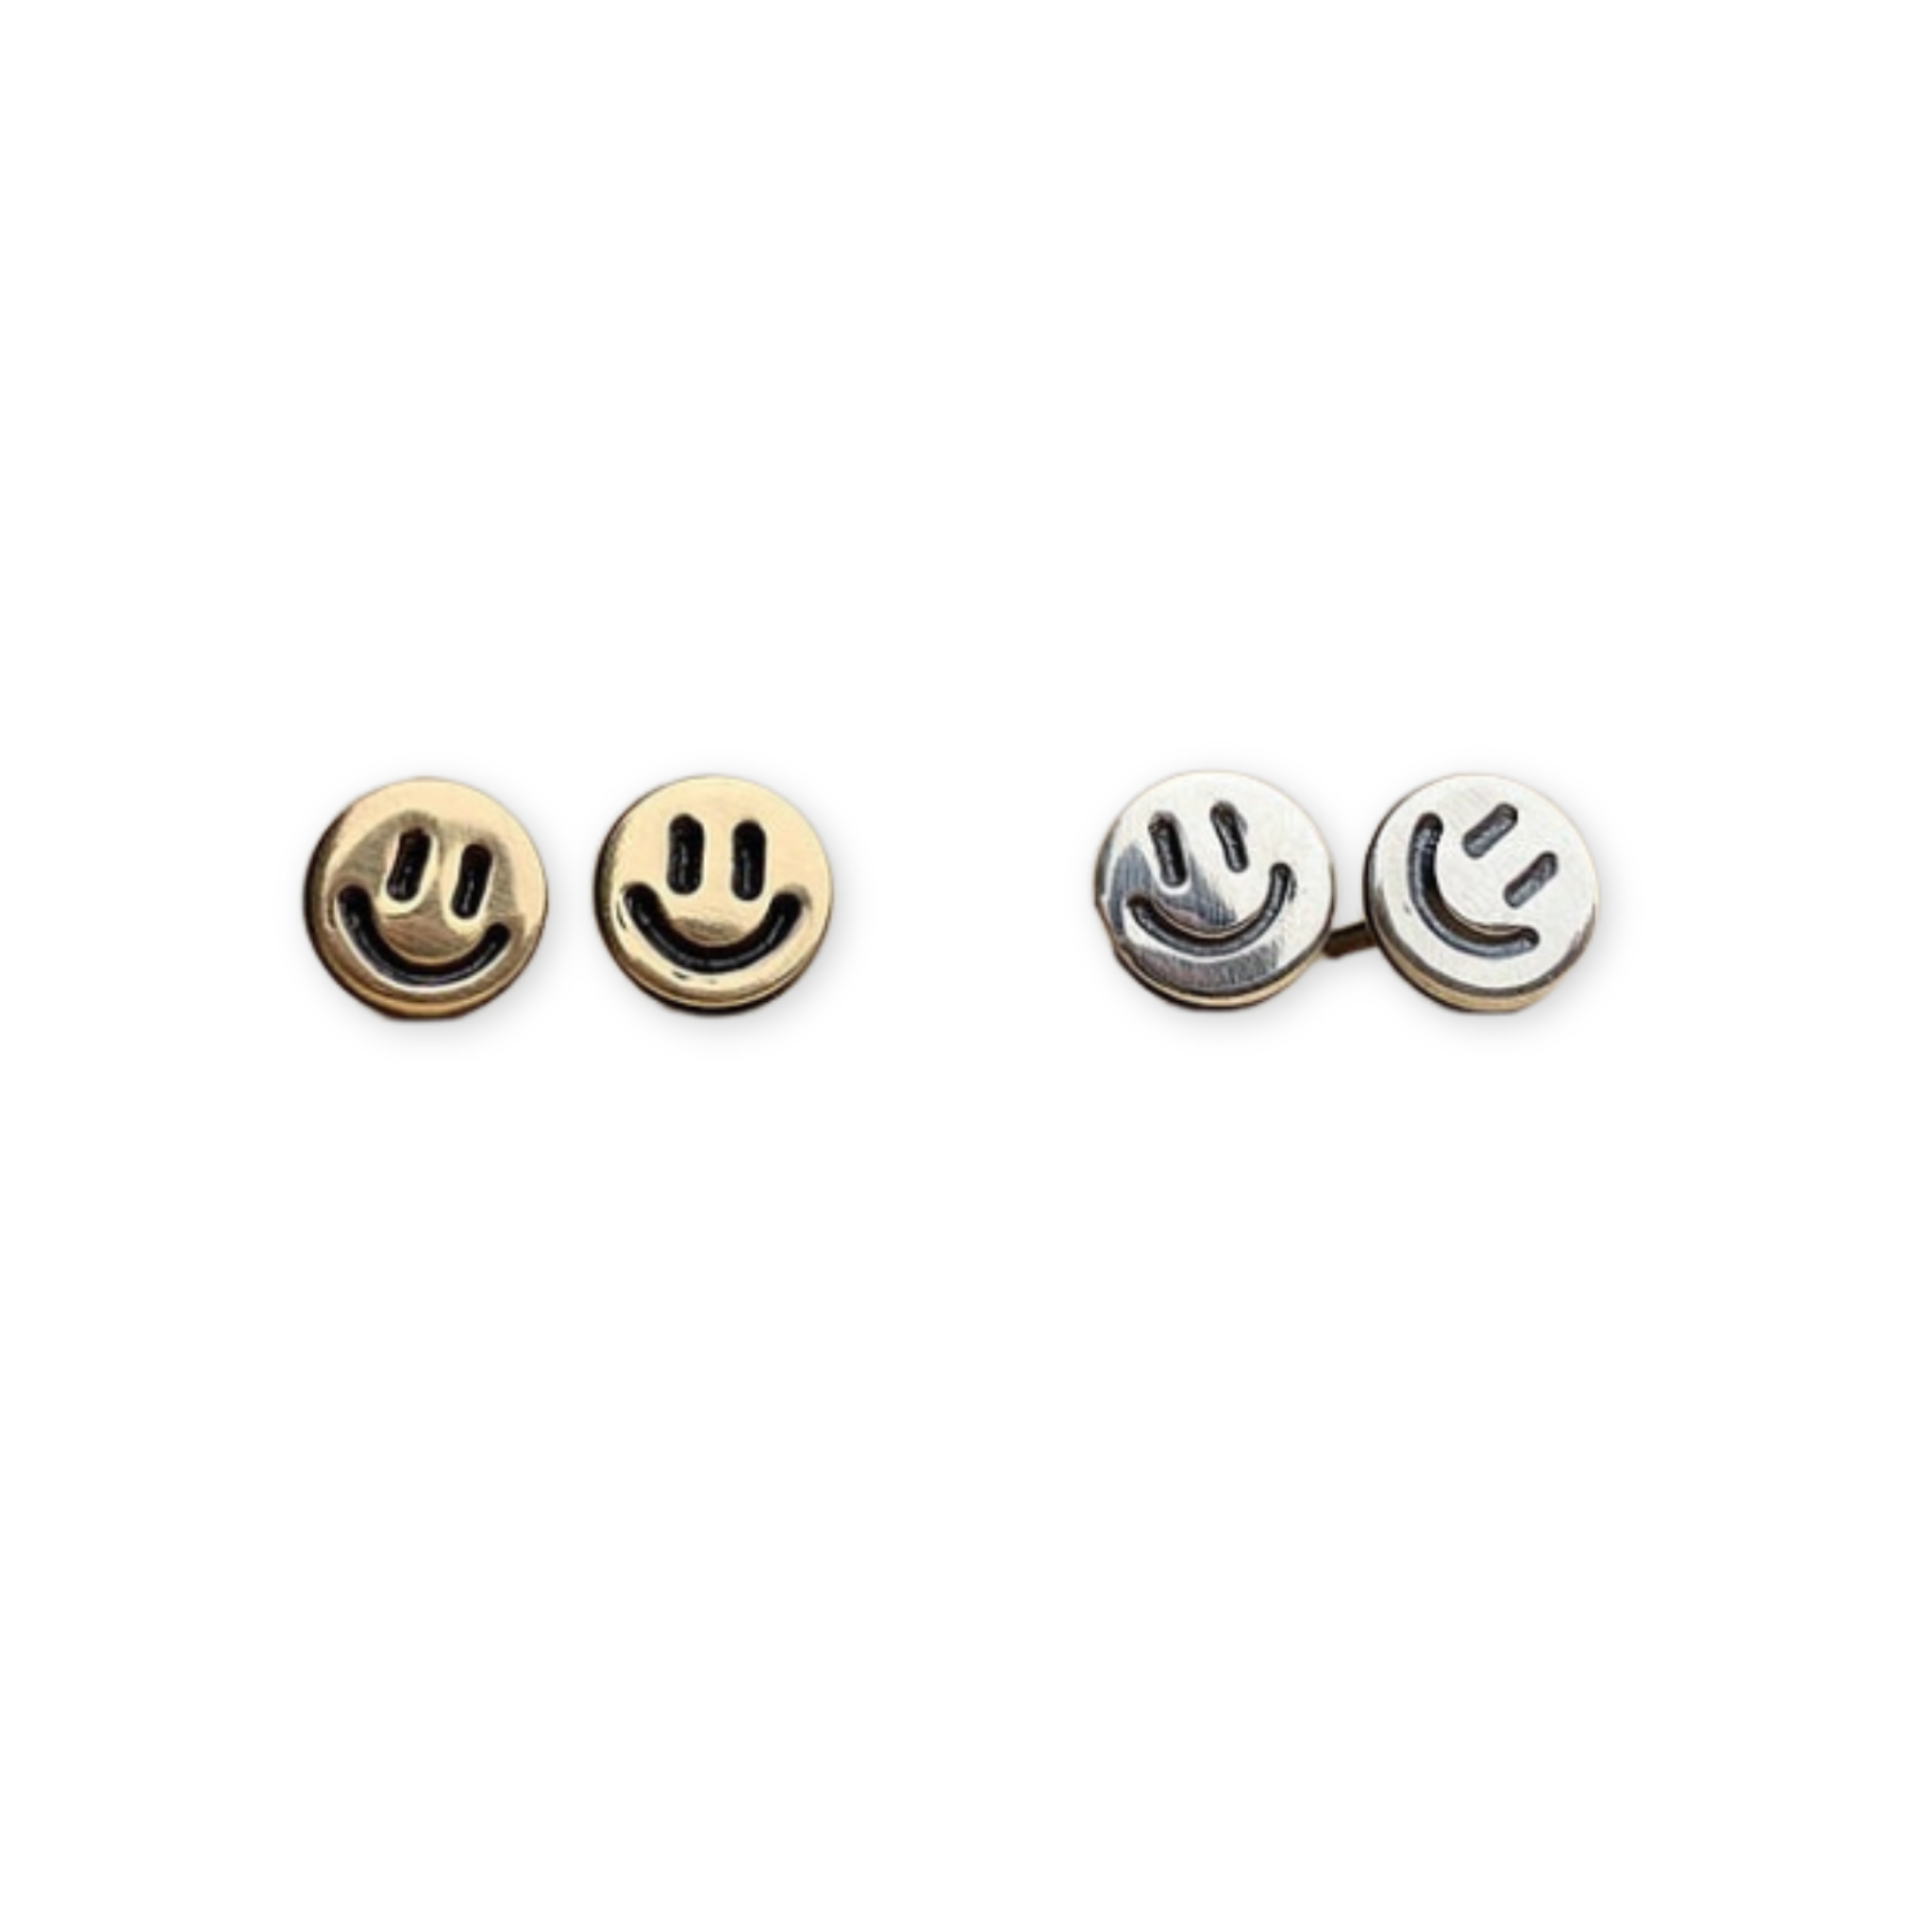 stud earrings with smiley faces